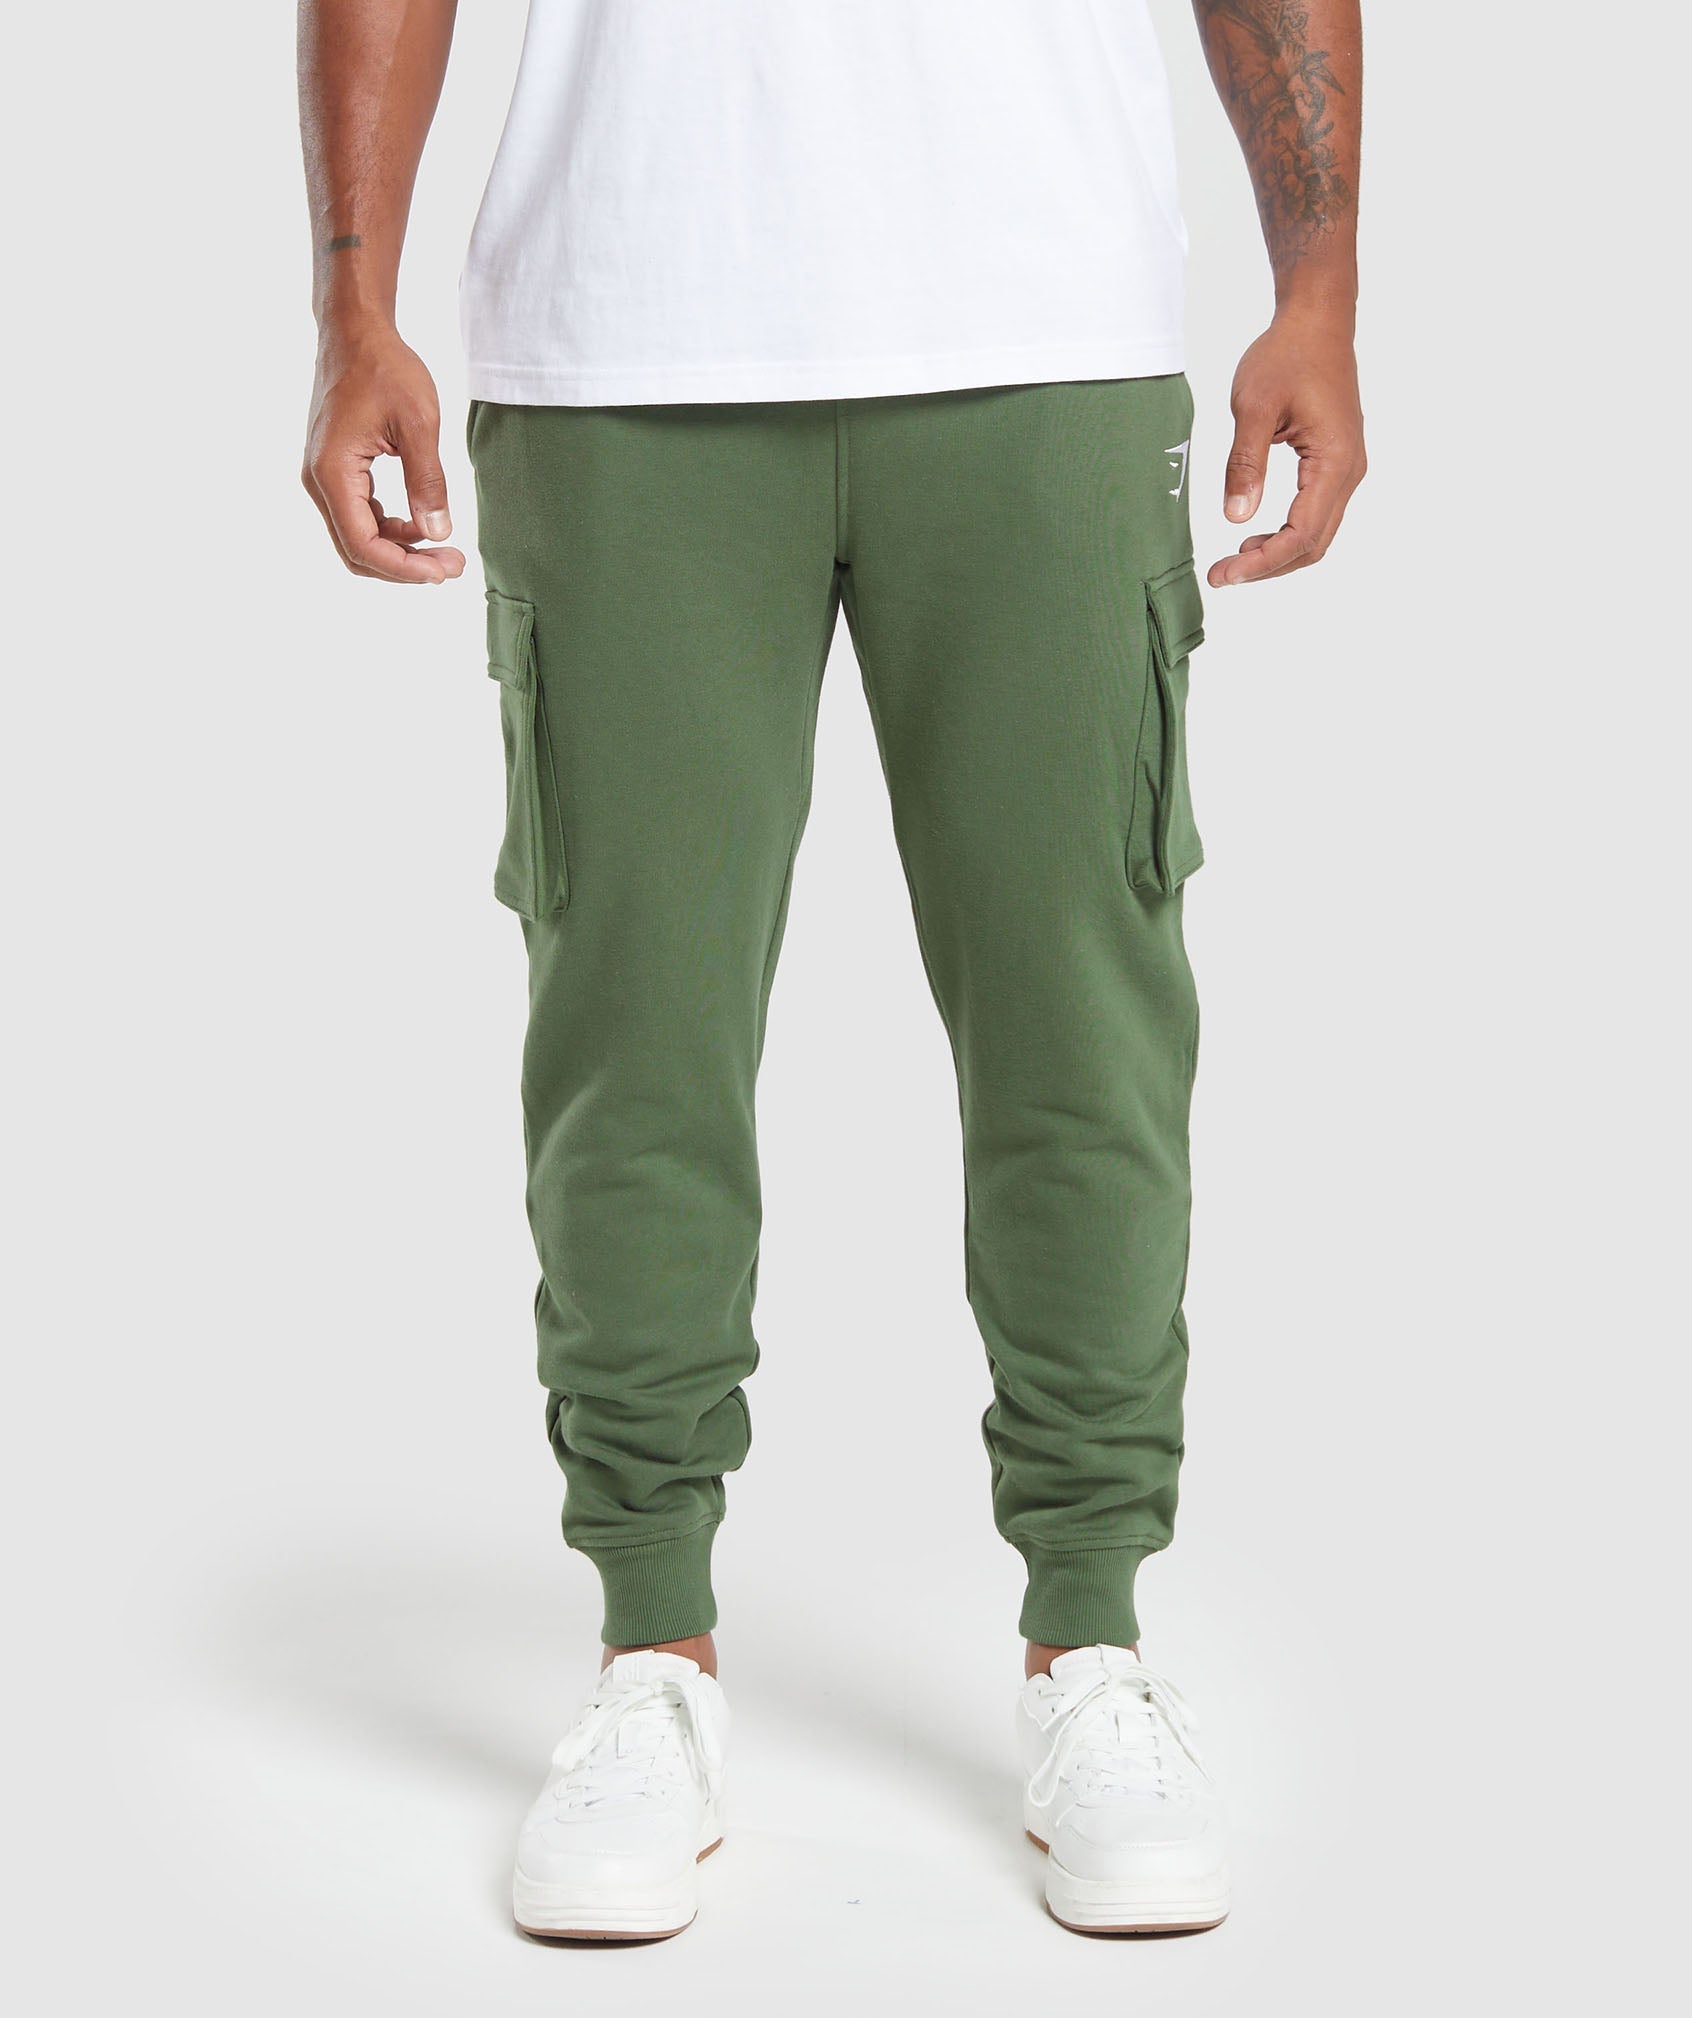 Buy Franklin & Marshall Mens Black Crest BB Joggers from Next USA